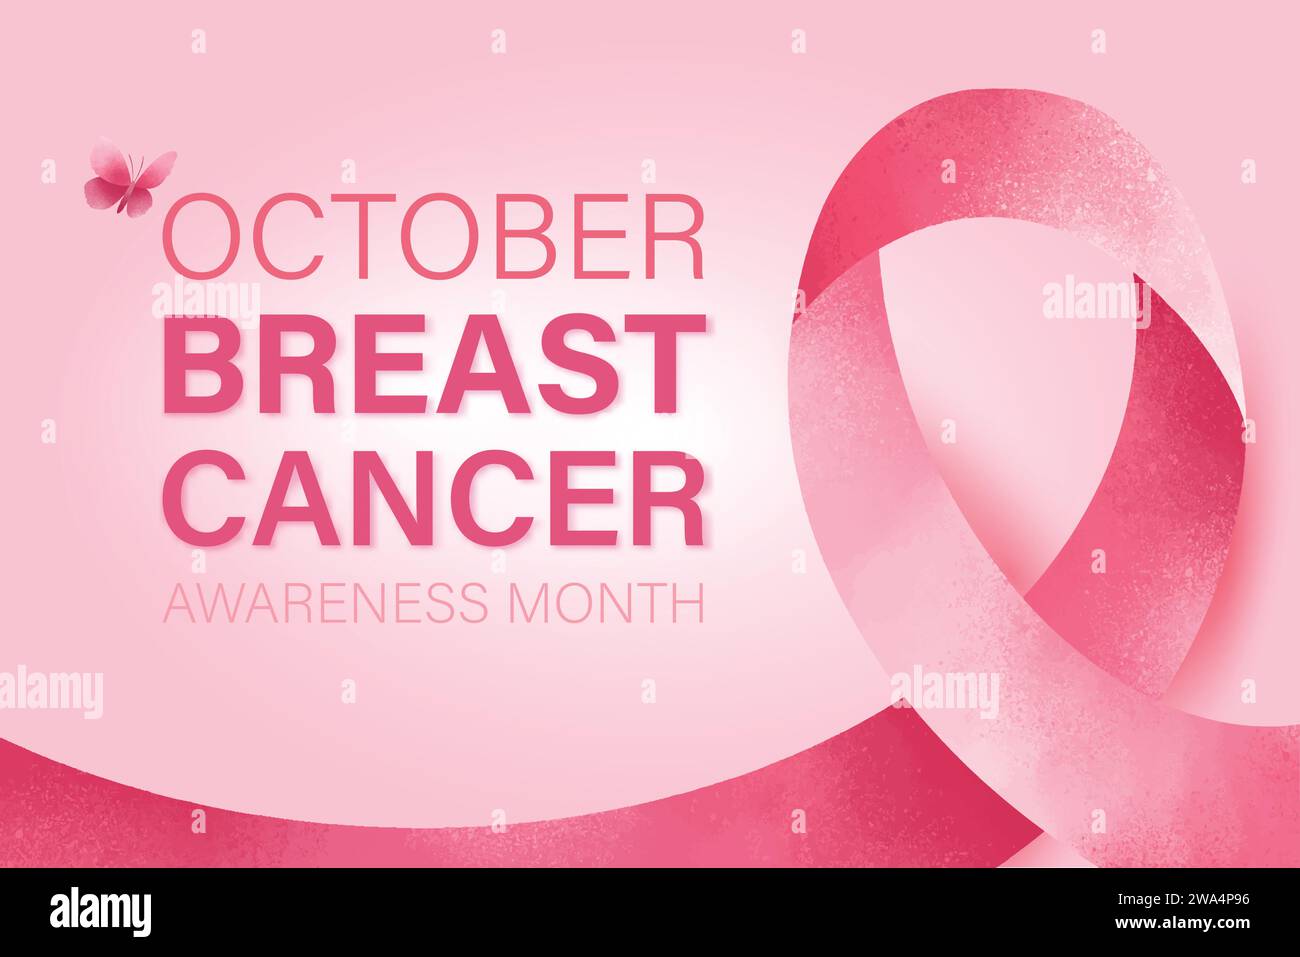 Women breast cancer awareness month background with pink ribbon symbol decoration Stock Vector